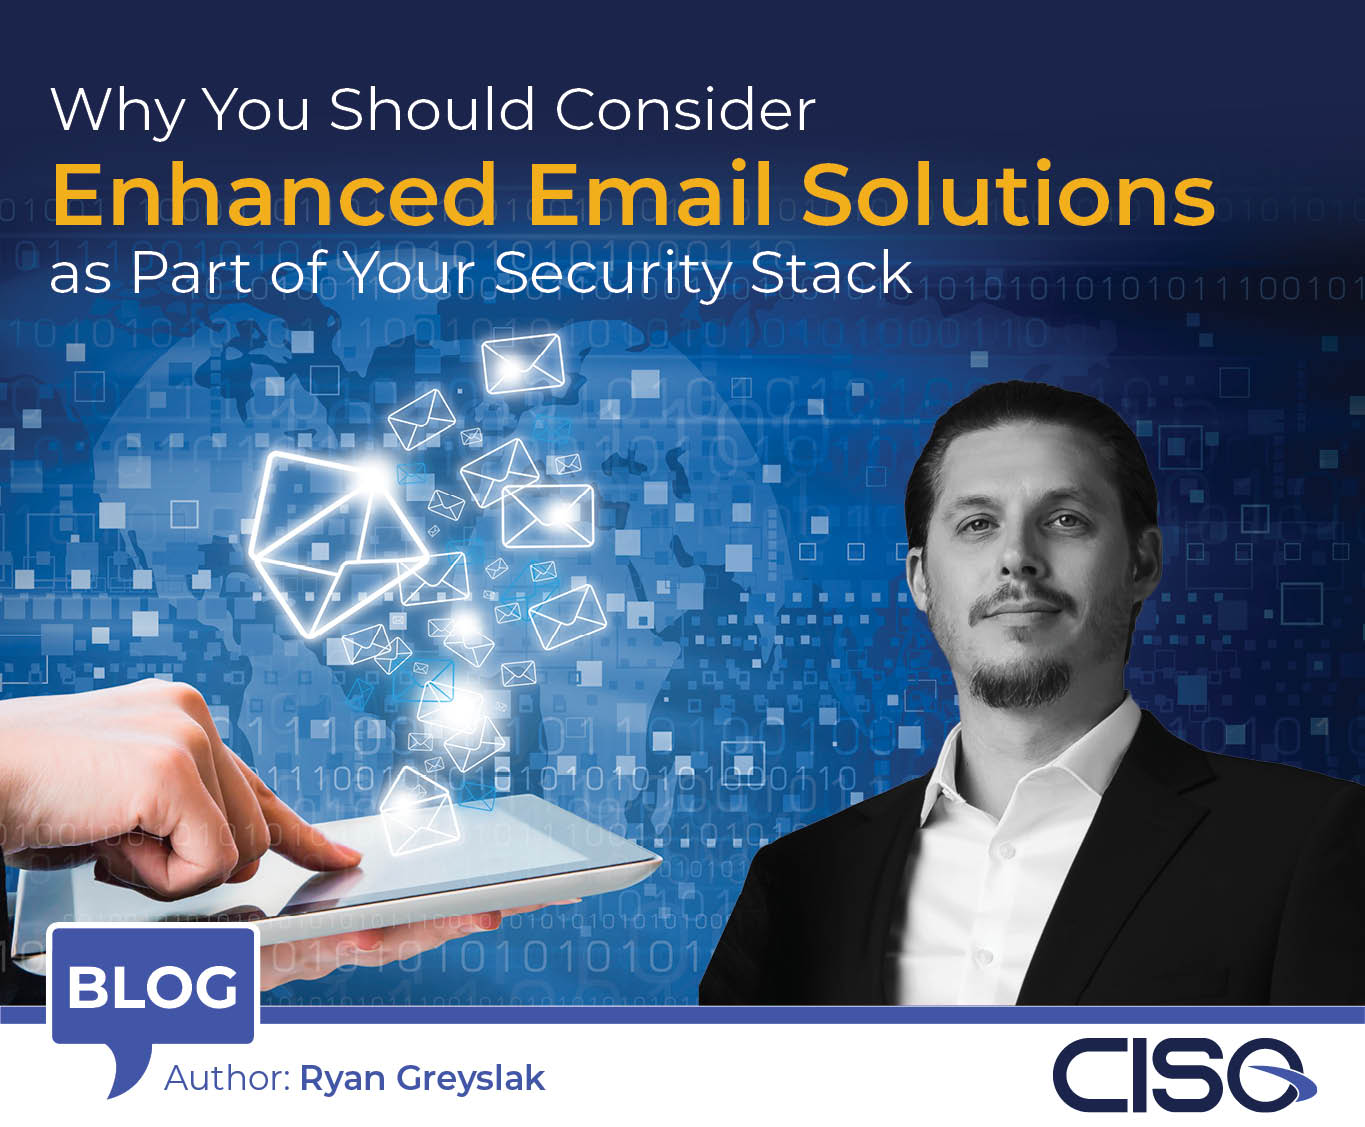 Why You Should Consider Enhanced Email Solutions as Part of Your Security Stack